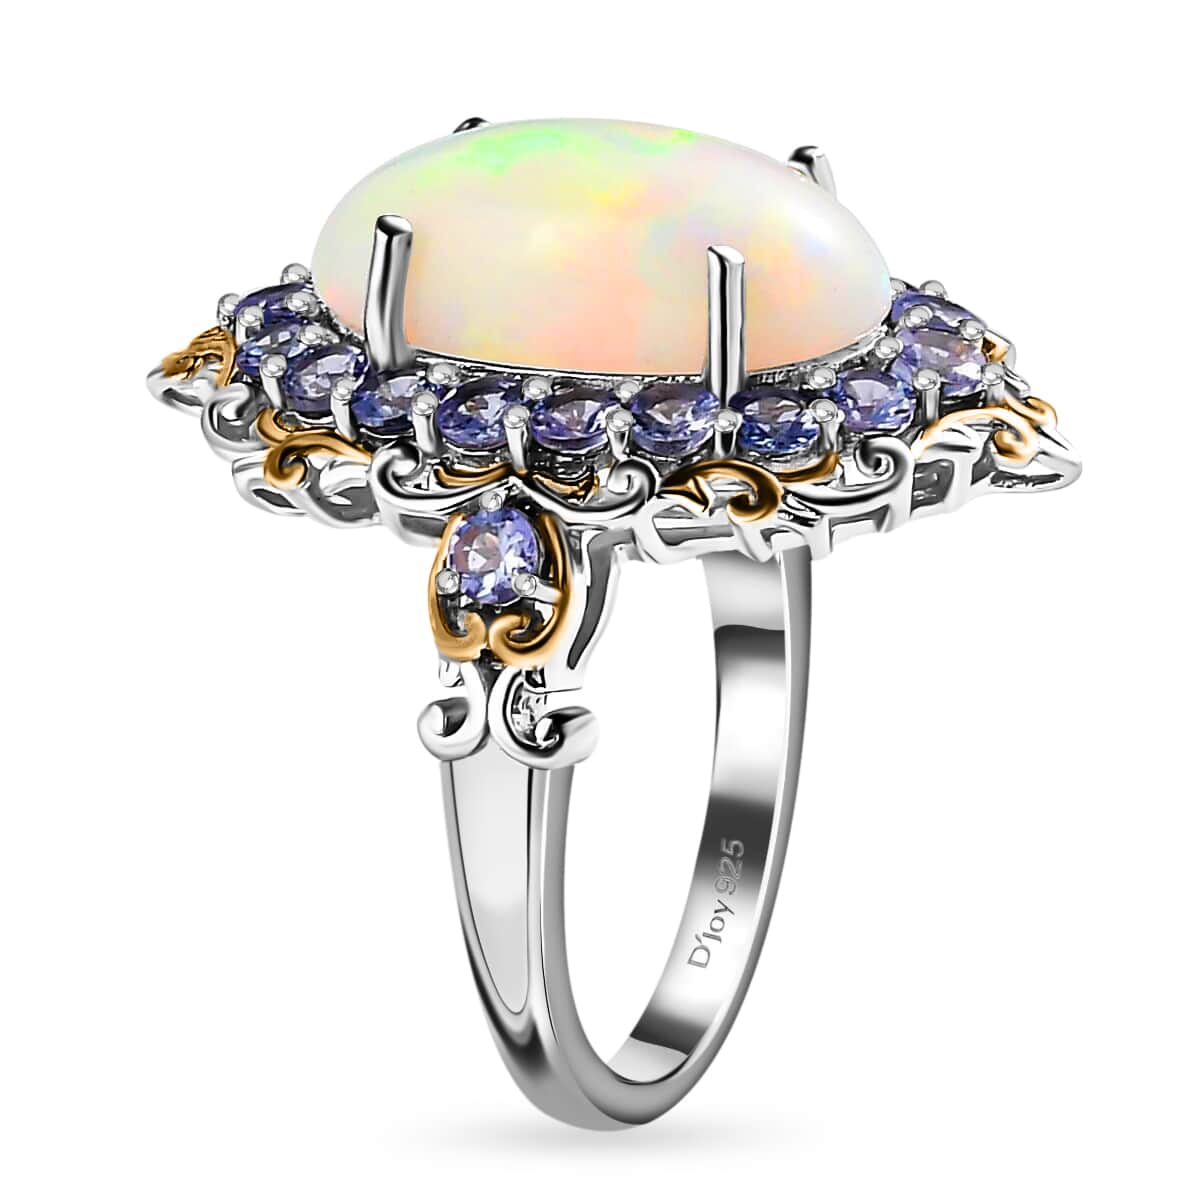 Premium Ethiopian Welo Opal Ring, Tanzanite Accent Ring, Floral Halo Ring, Vermeil YG and Platinum Over Sterling Silver Ring, Opal Jewelry, Gifts For Her 4.75 ctw (Size 10.0) image number 3